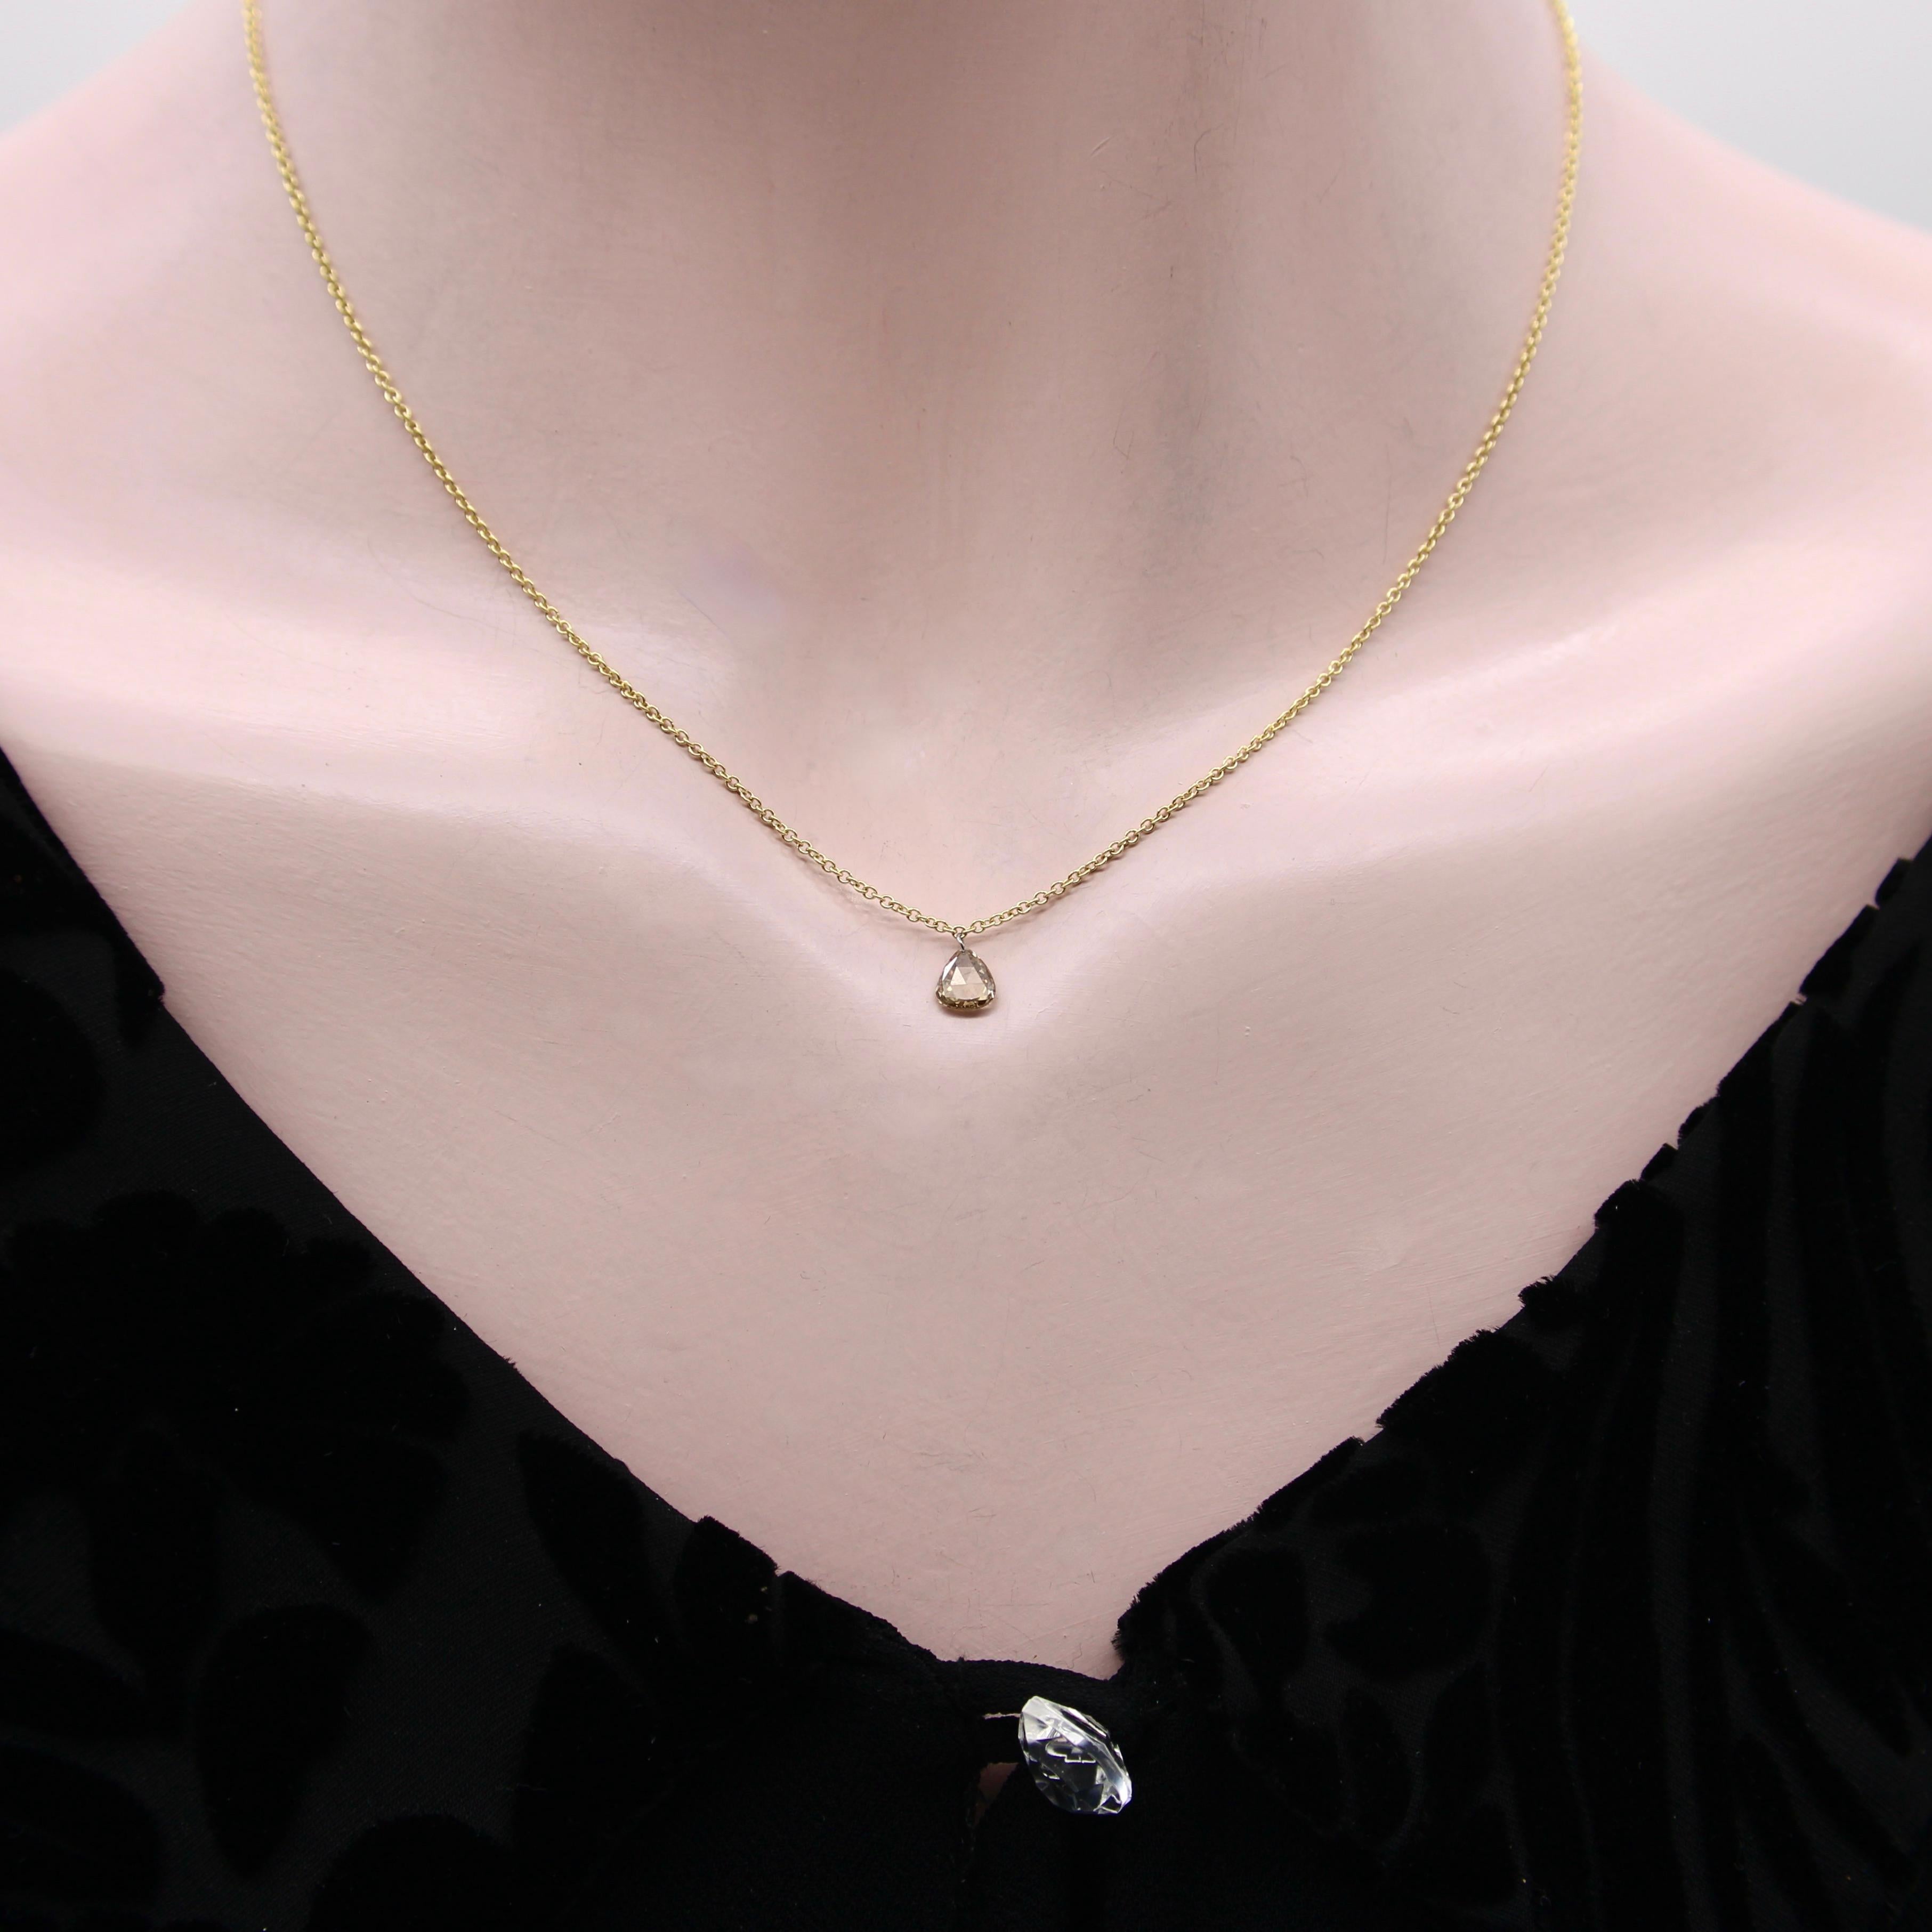 Dangling Pear Shaped Cognac Rose Cut Diamond on 14K Gold Chain  For Sale 4